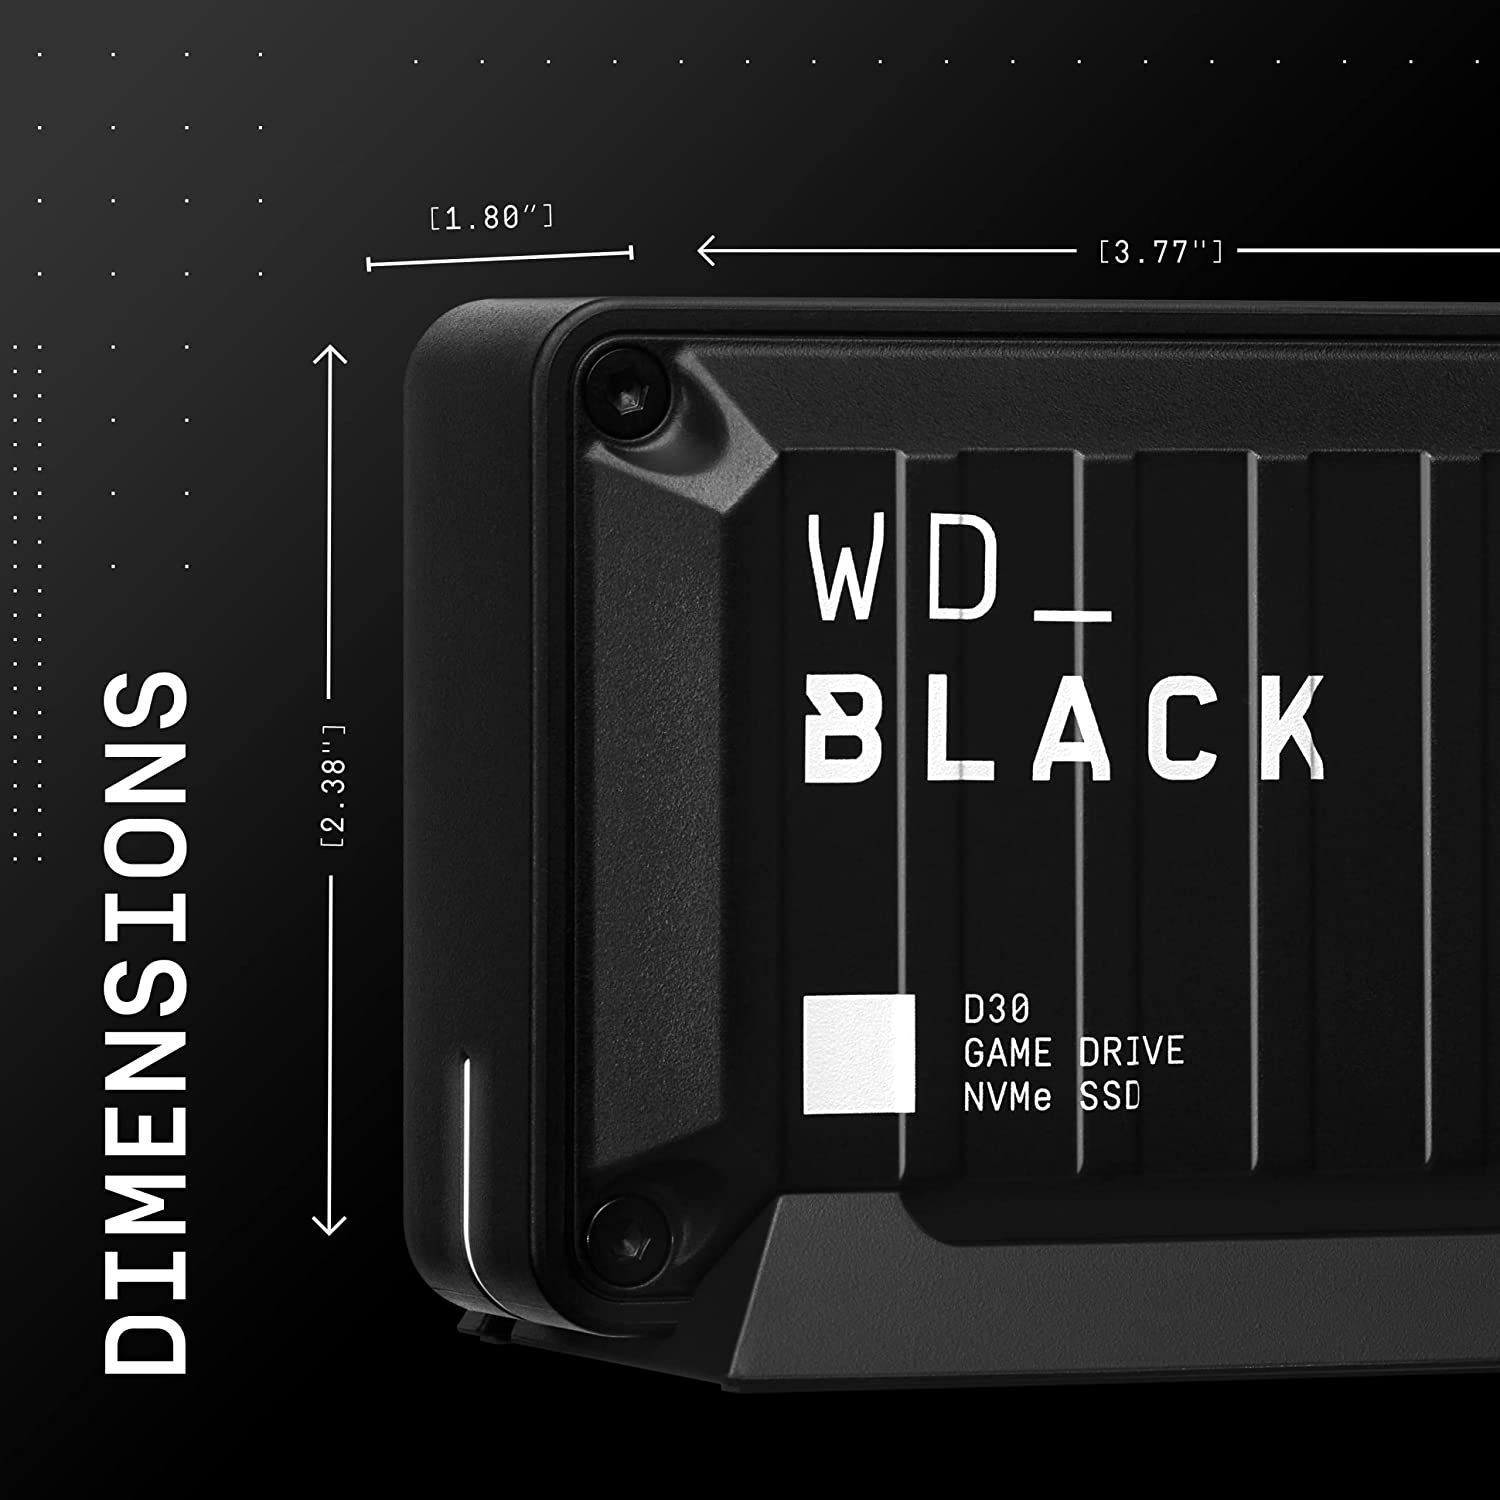 WD_BLACK 500GB D30 Game Drive SSD - Portable External Solid State Drive, Compatible with Playstation, Xbox, & PC, up to 900Mb/S - WDBATL5000ABK-WESN